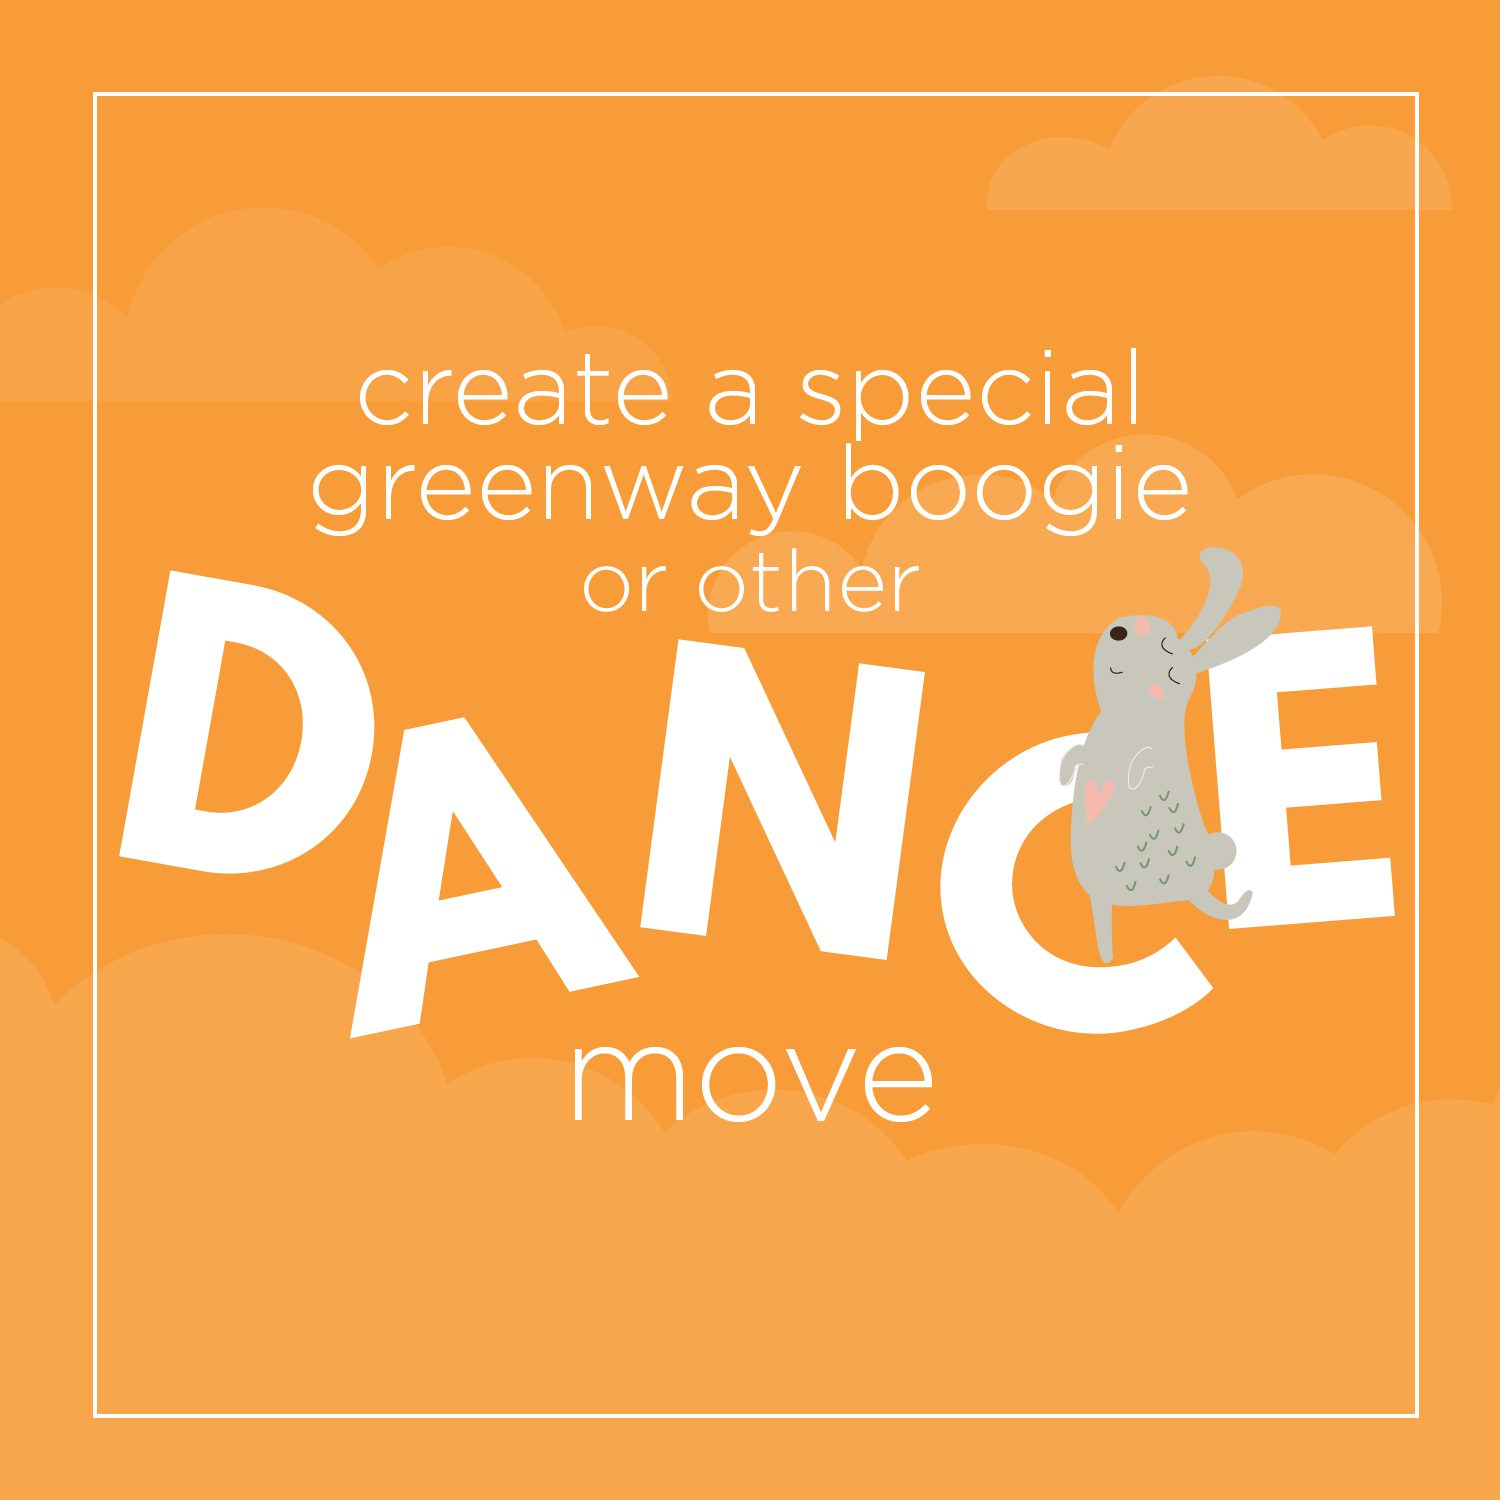 Create a special greenway boogie or other dance move